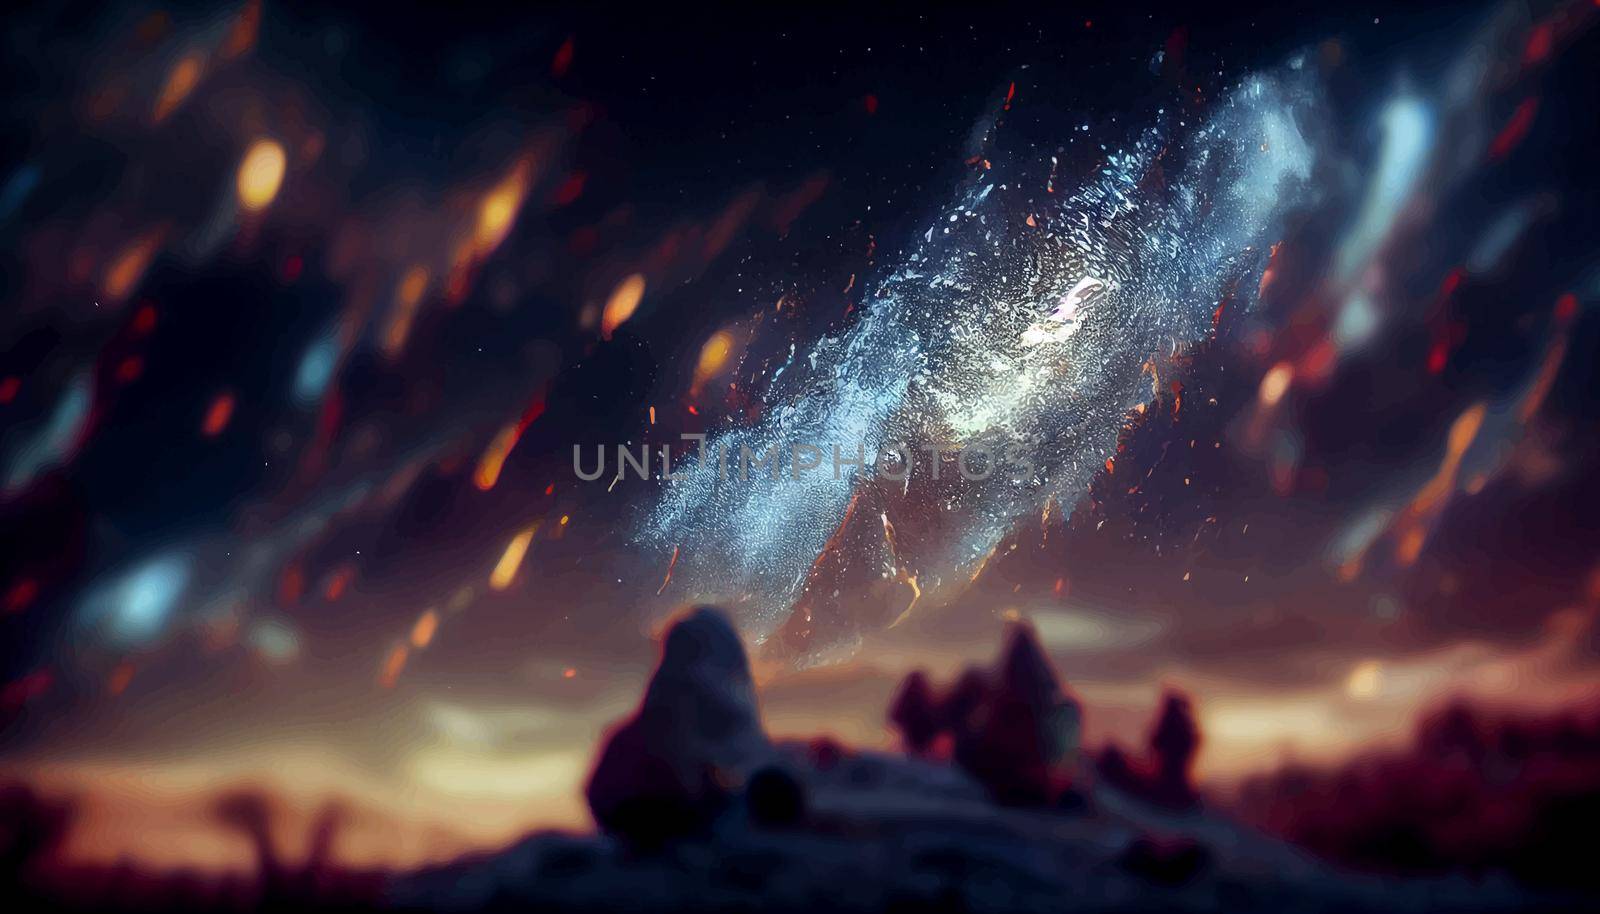 space epic realistic galaxy illustration. illustration for wallpaper.